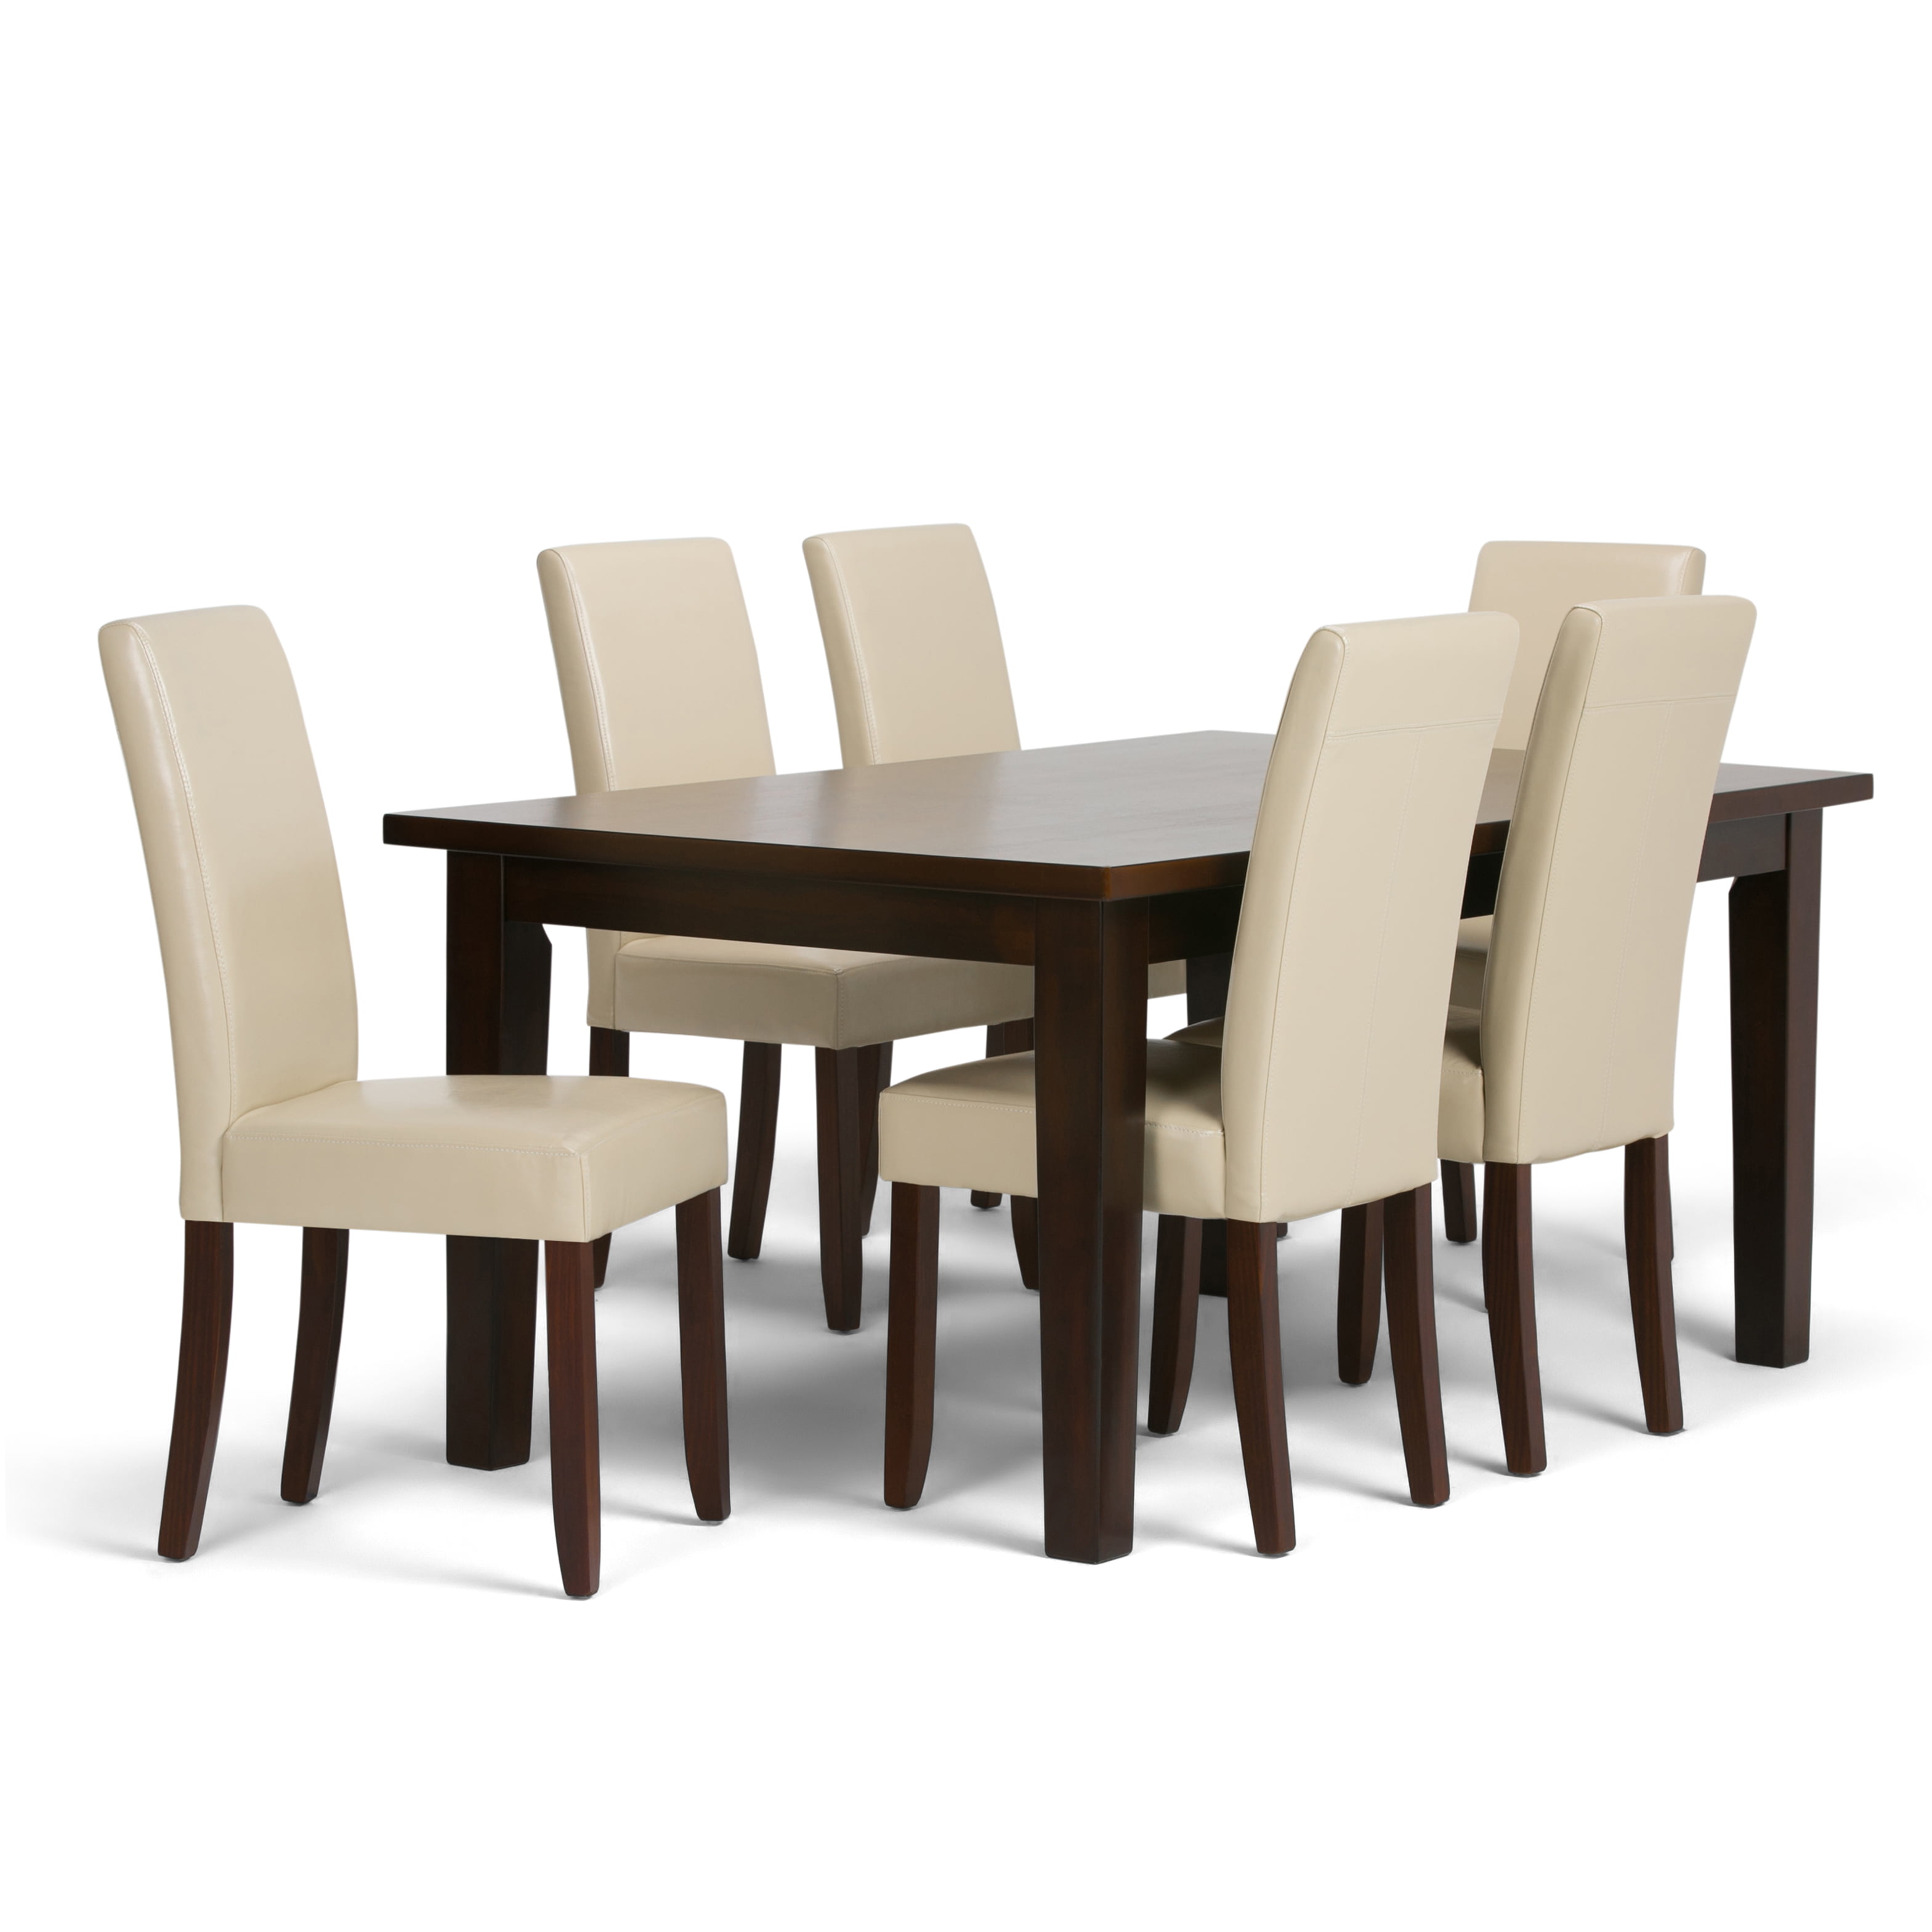 Simpli Home Acadian 7 Piece Dining Set Tanners Brown